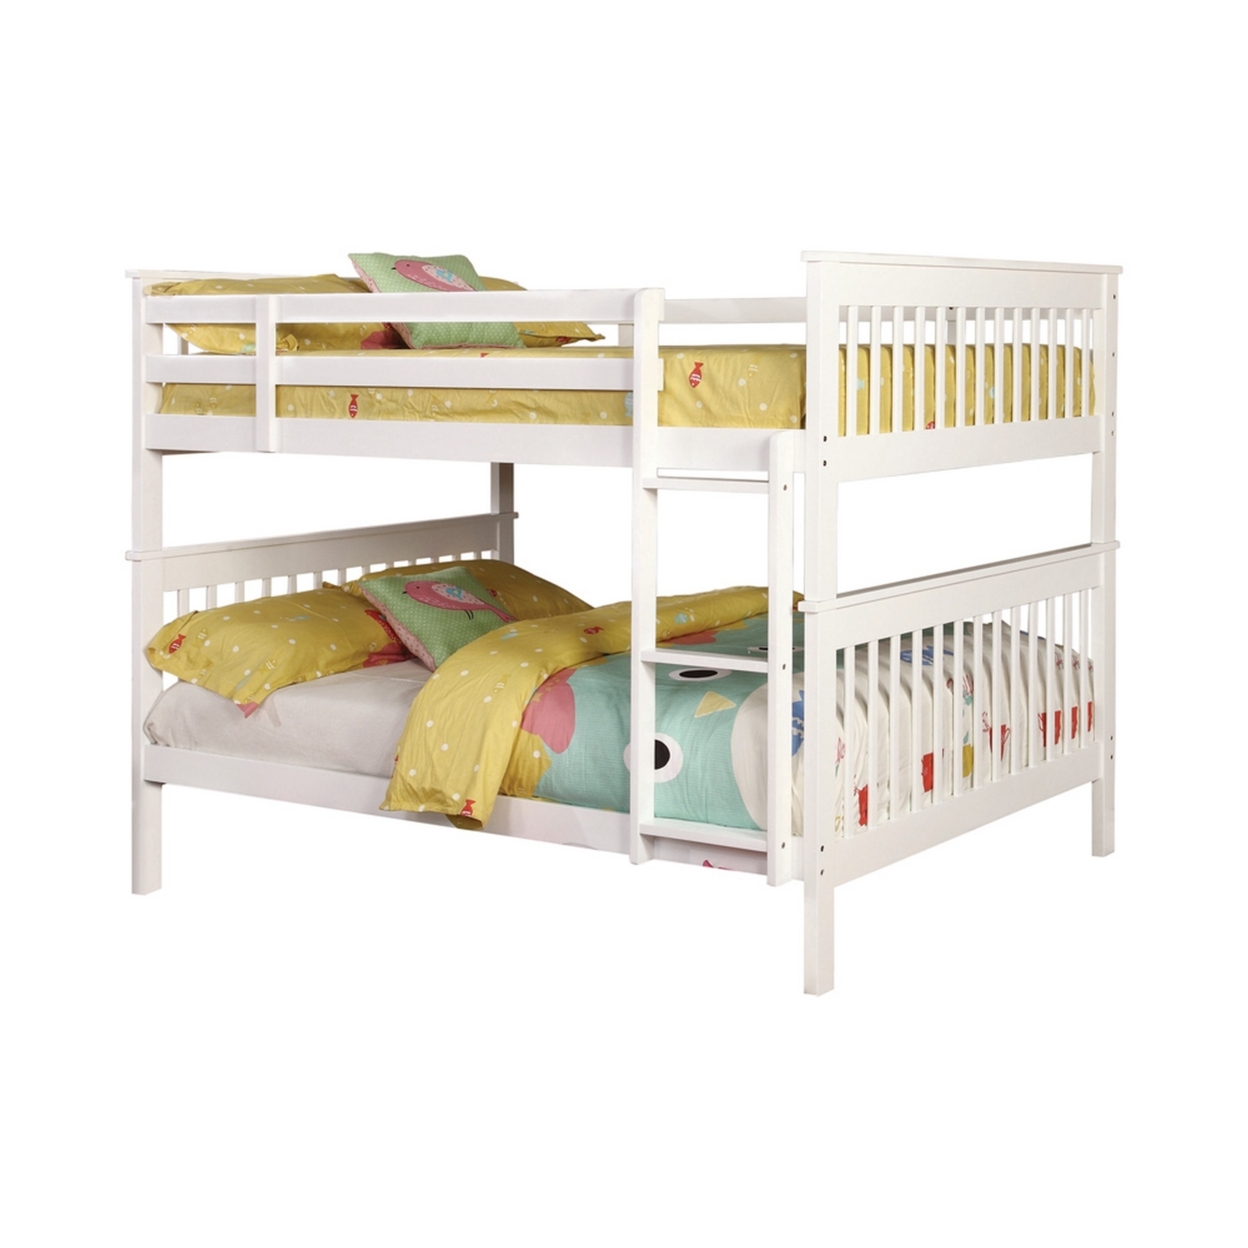 Mission Style Full Over Full Bunk Bed With Attached Ladder, White- Saltoro Sherpi